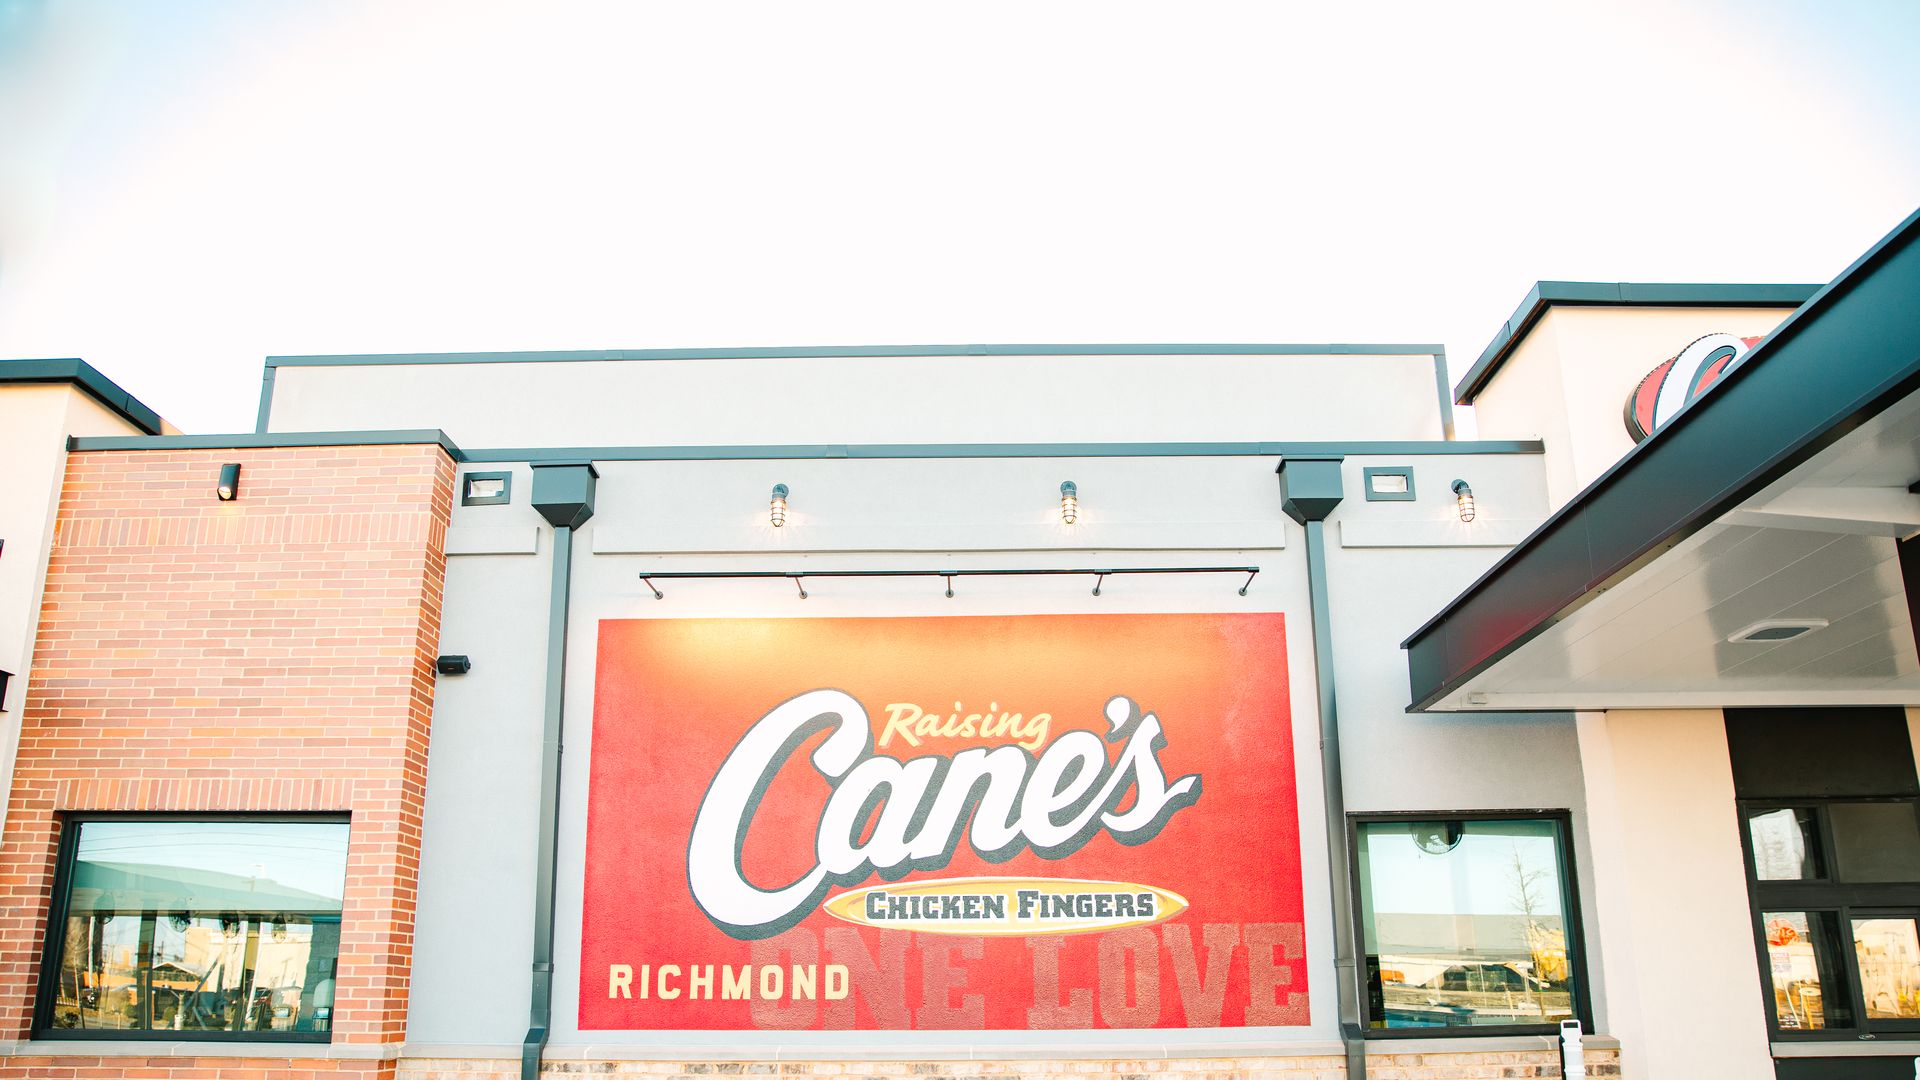 A pic of Raising Cane's Richmond with a red sign that says "Raising Cane's Chicken Fingers" and Richmond in the left corner.